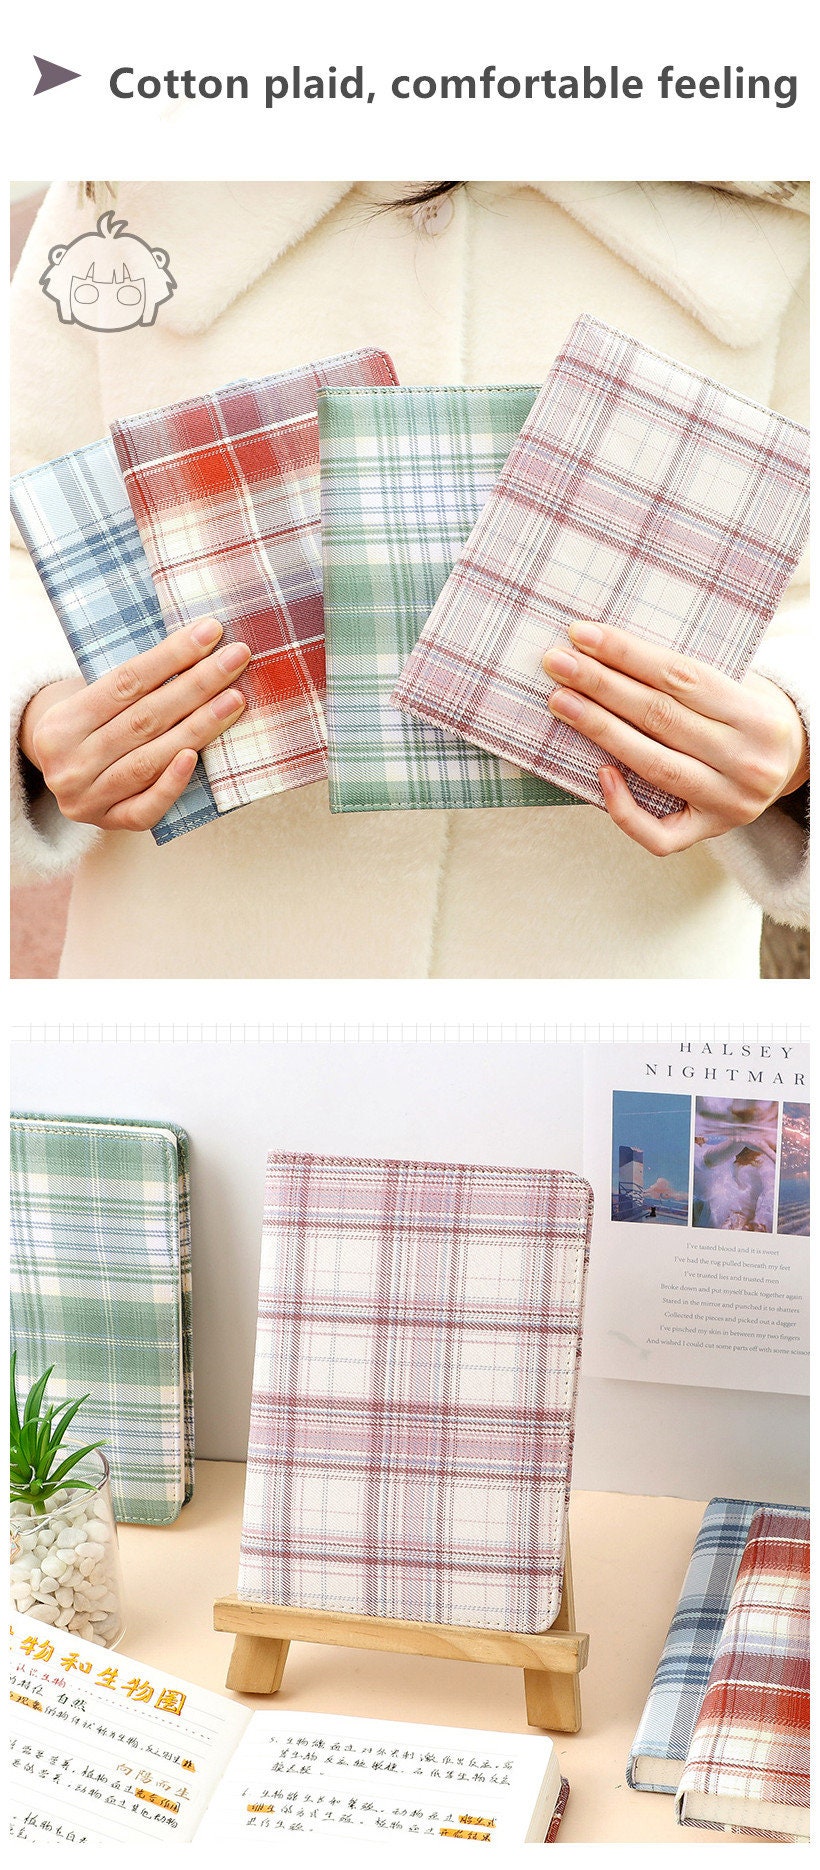 Literary Plaid Fabric Hardcover Notebook Lined Grid Pages Retro Diary Cotton Journal College Student Ins Notepad 32K Five Color Notepad Gift